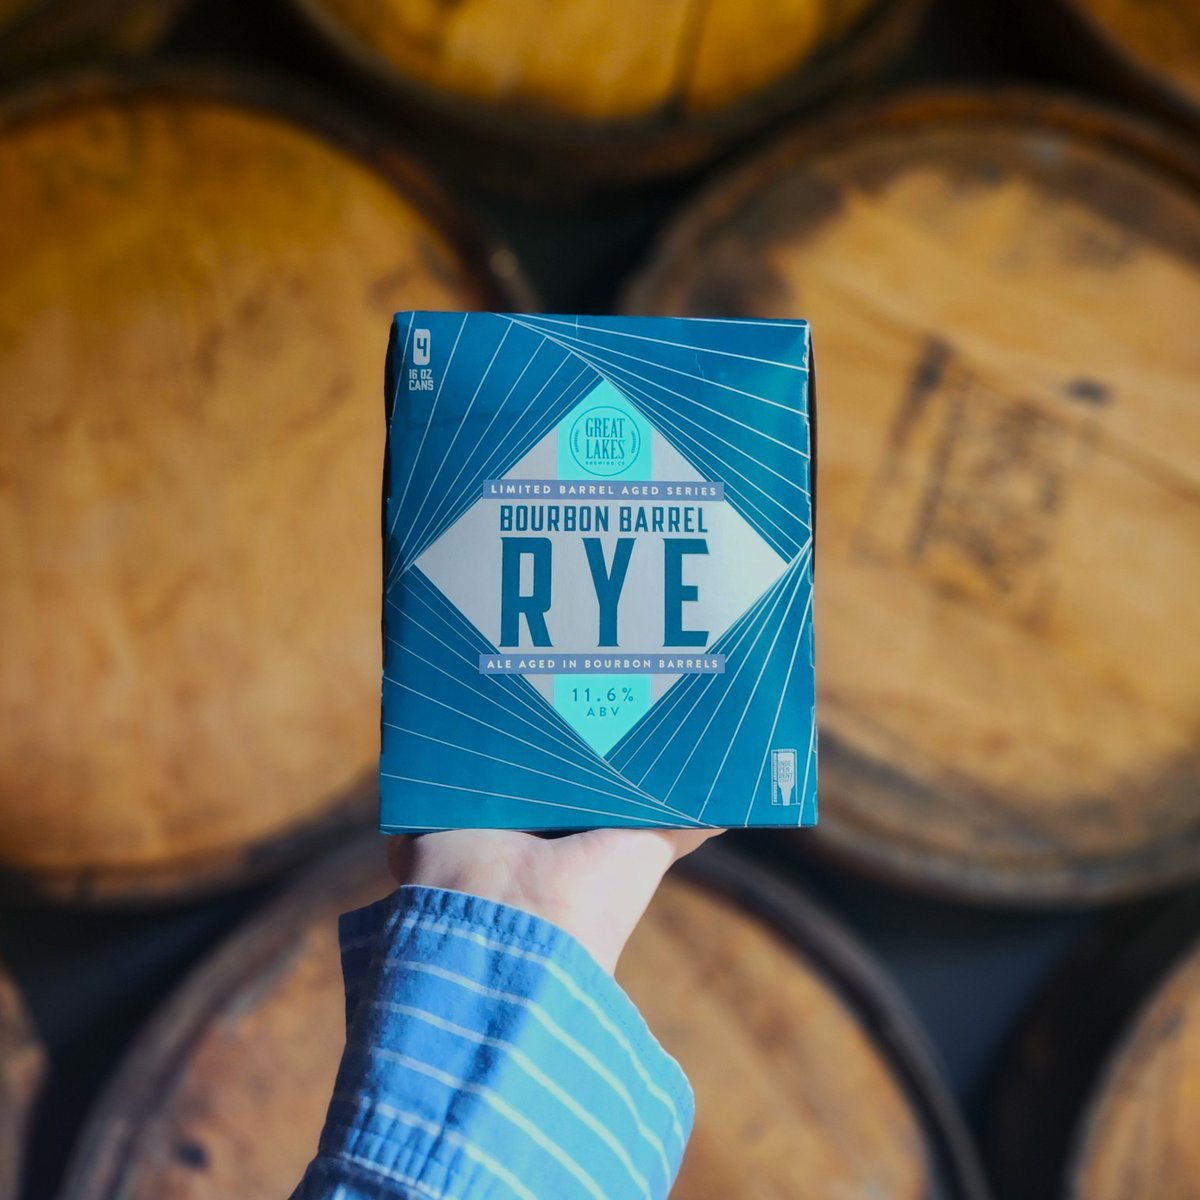 Aged to perfection, the new Limited Release Bourbon Barrel Rye is now available in the gift shop. Be on the lookout for 16 oz. Can 4-Packs near you, releasing soon throughout our distribution footprint.